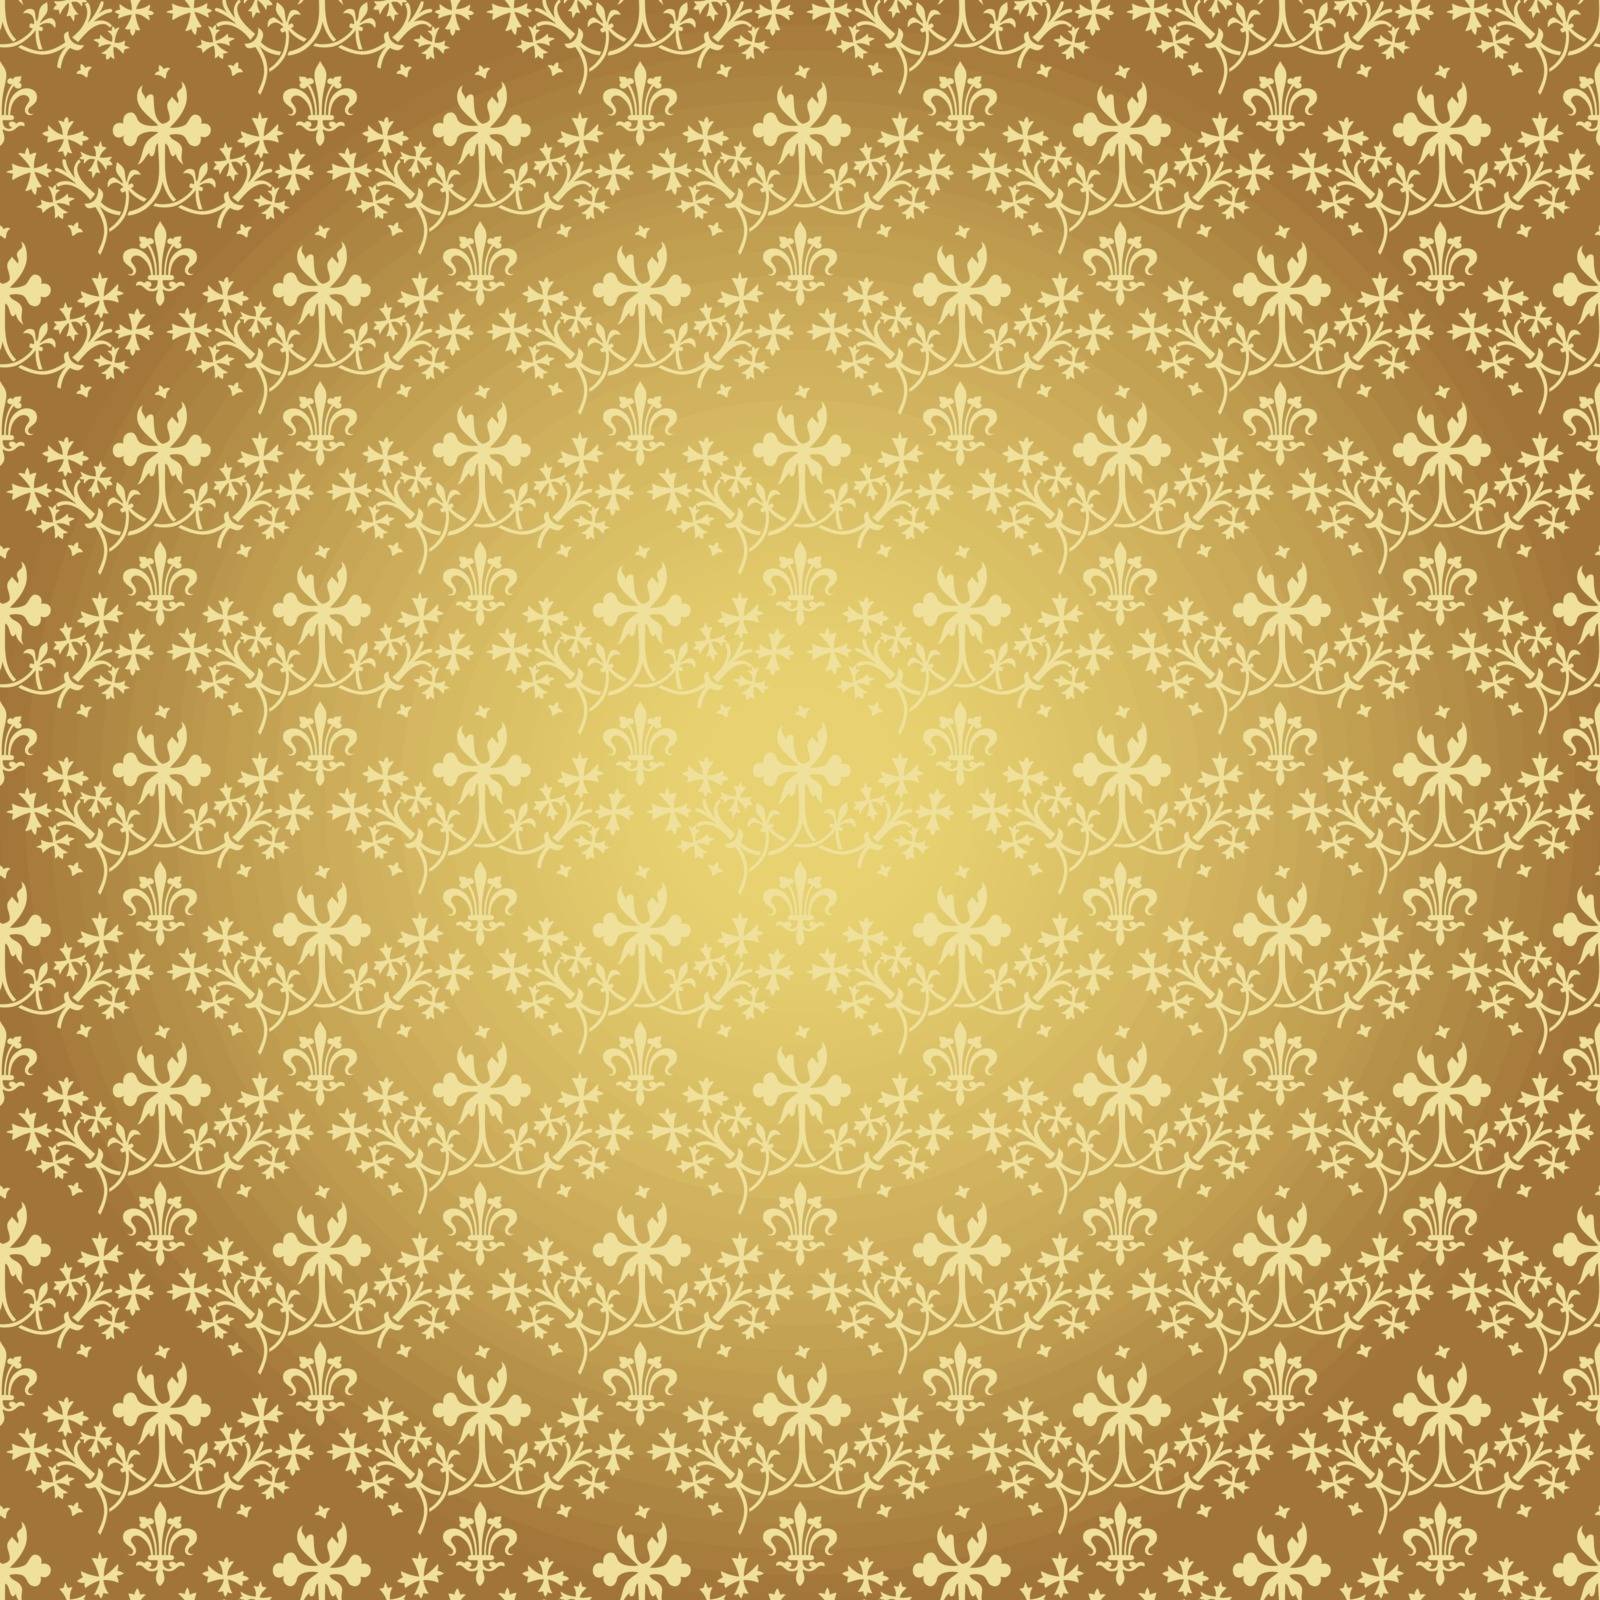 Golden ornament for Your design. Vector image. 